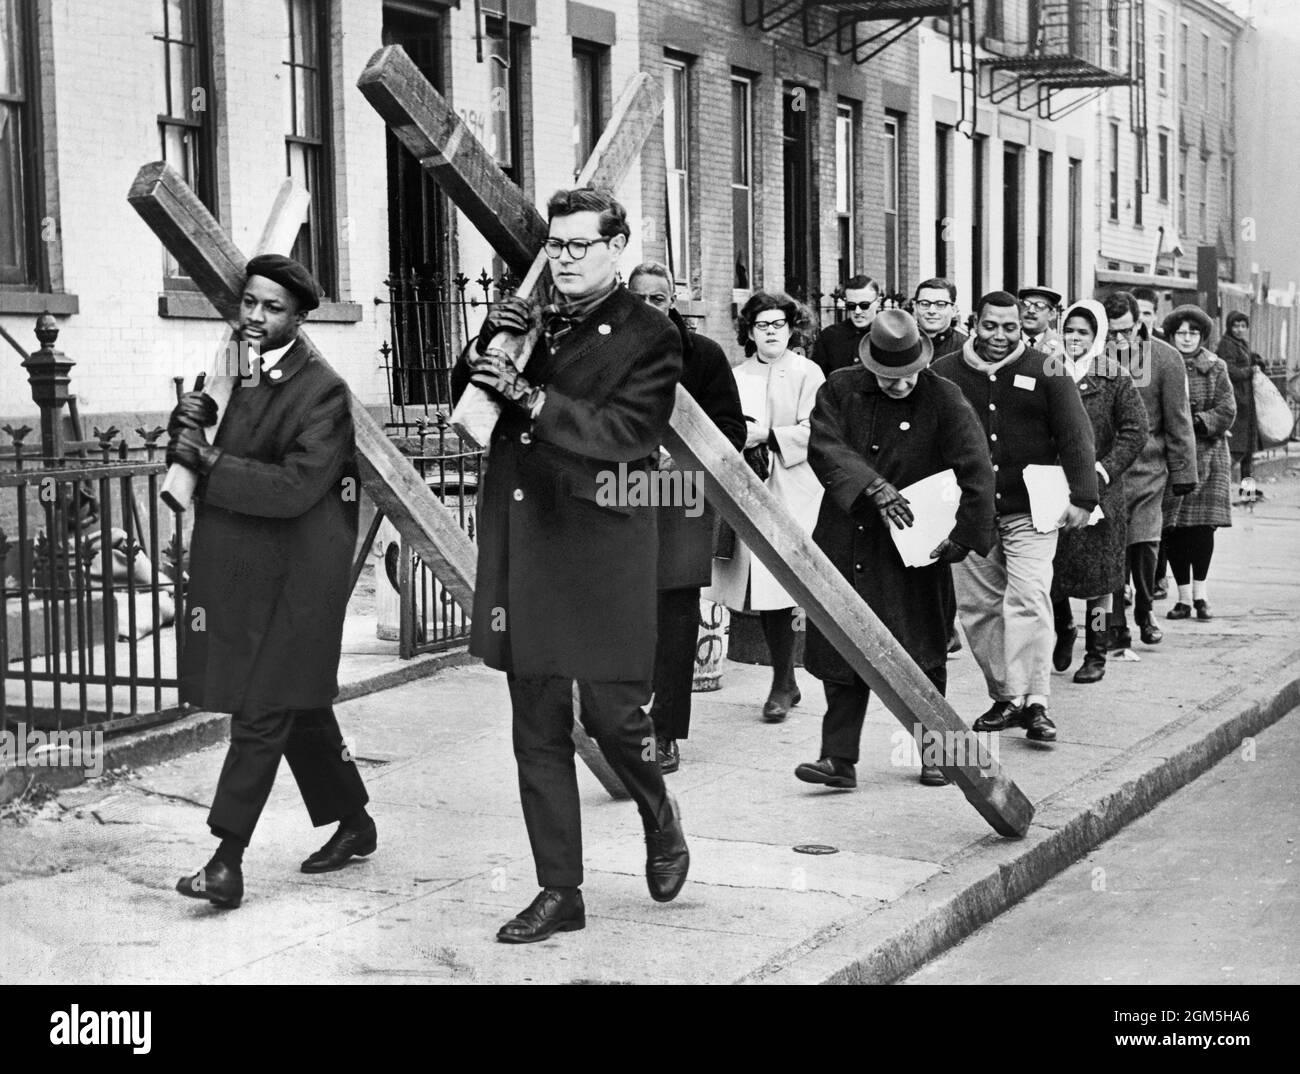 Ken Rice, left, and Stan Brezenoff, lead members of Brooklyn's Congress of Racial Equality (CORE), dragging crosses during March from Brooklyn to City Hall, New York City, New York, USA, Walter Albertin, New York World-Telegram and the Sun Newspaper Photograph Collection, 1964 Stock Photo